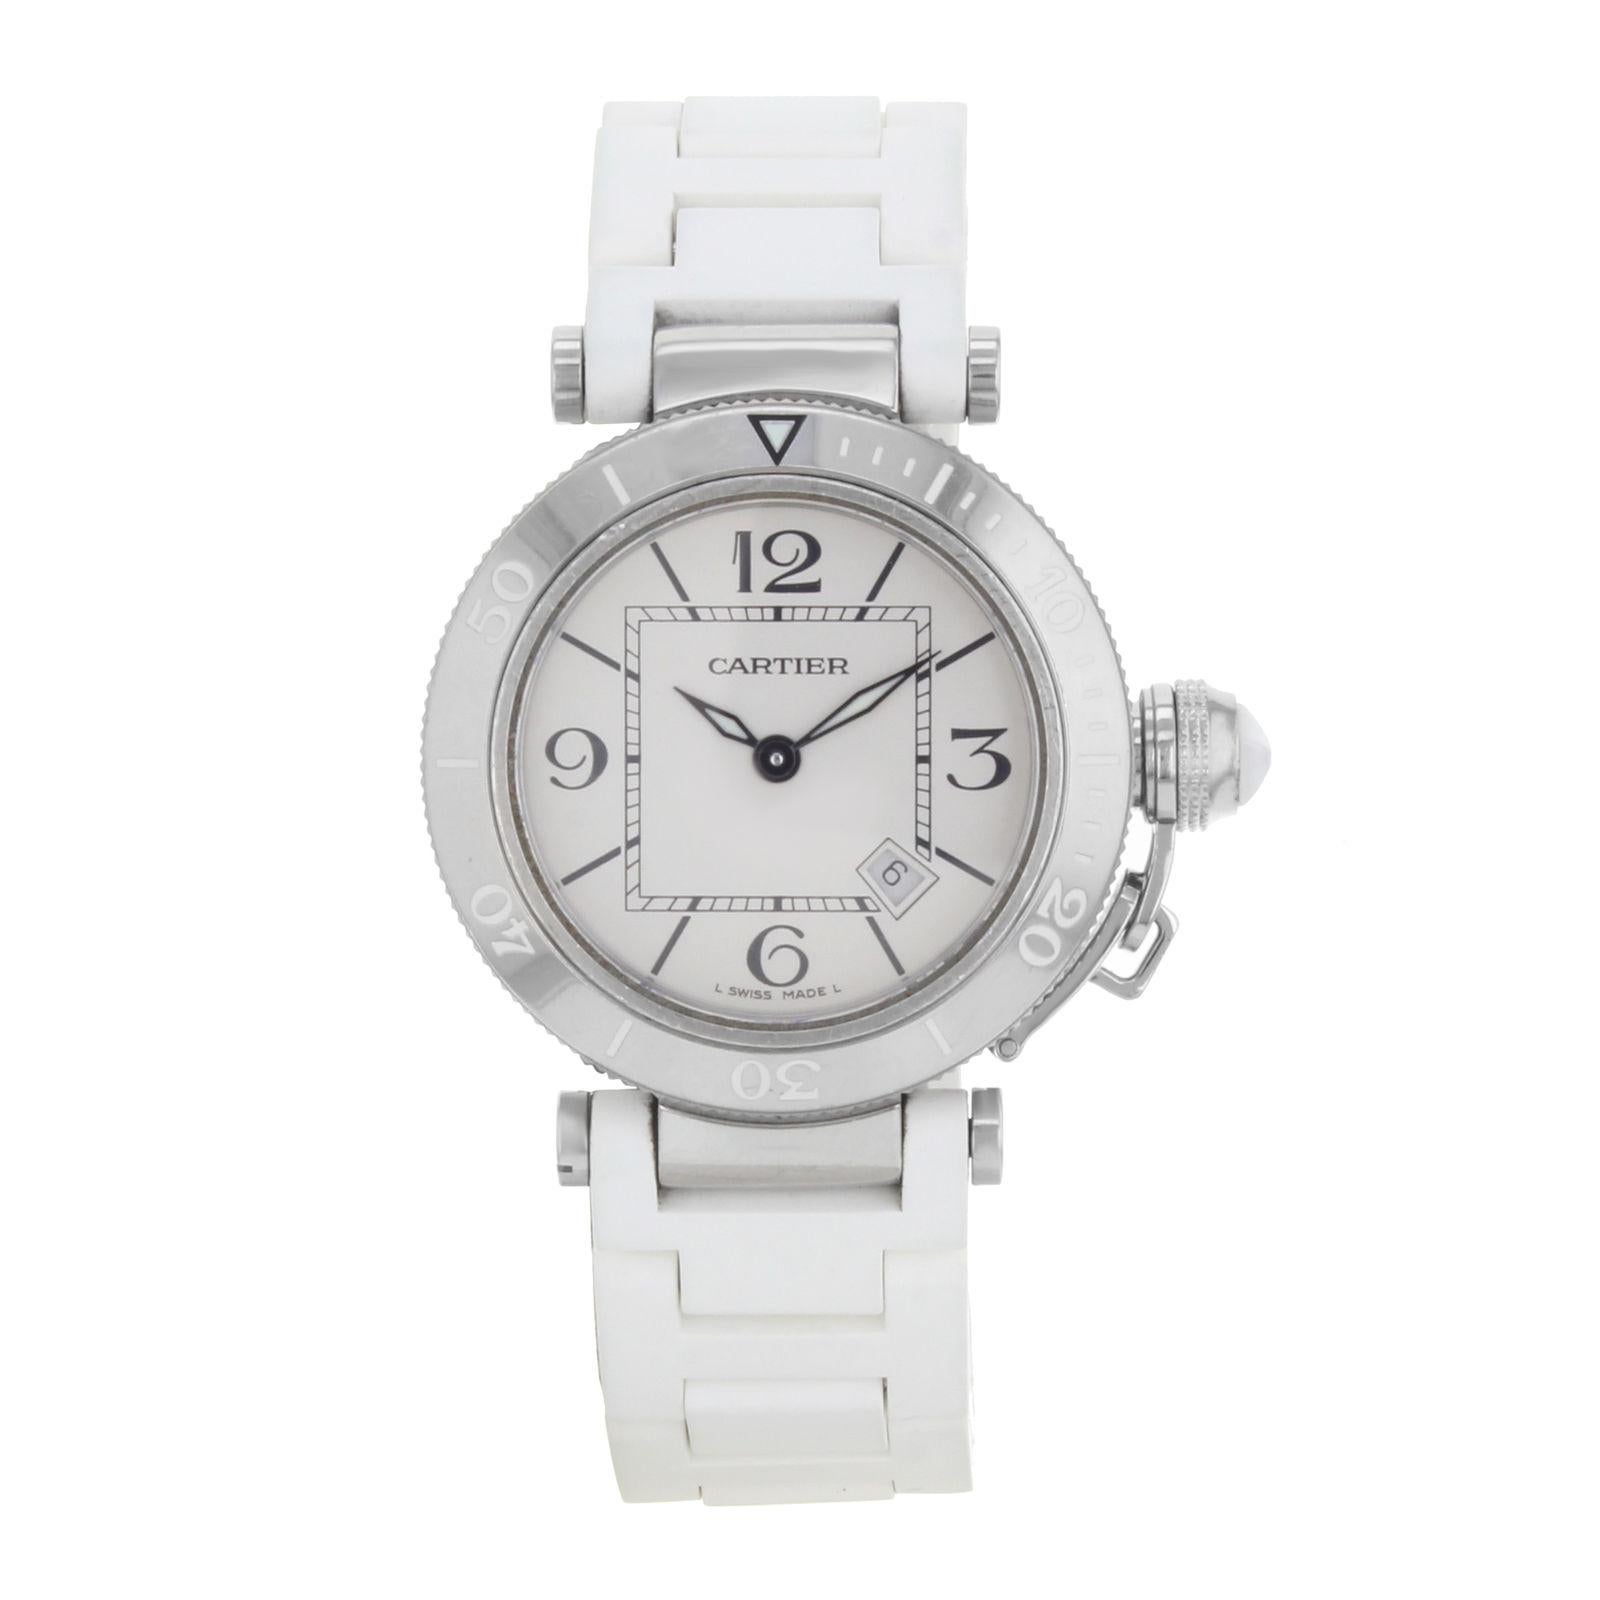 This pre-owned Cartier Pasha W3140002 is a beautiful Womens timepiece that is powered by a quartz movement which is cased in a stainless steel case. It has a round shape face, date dial and has hand arabic numerals, sticks style markers. It is